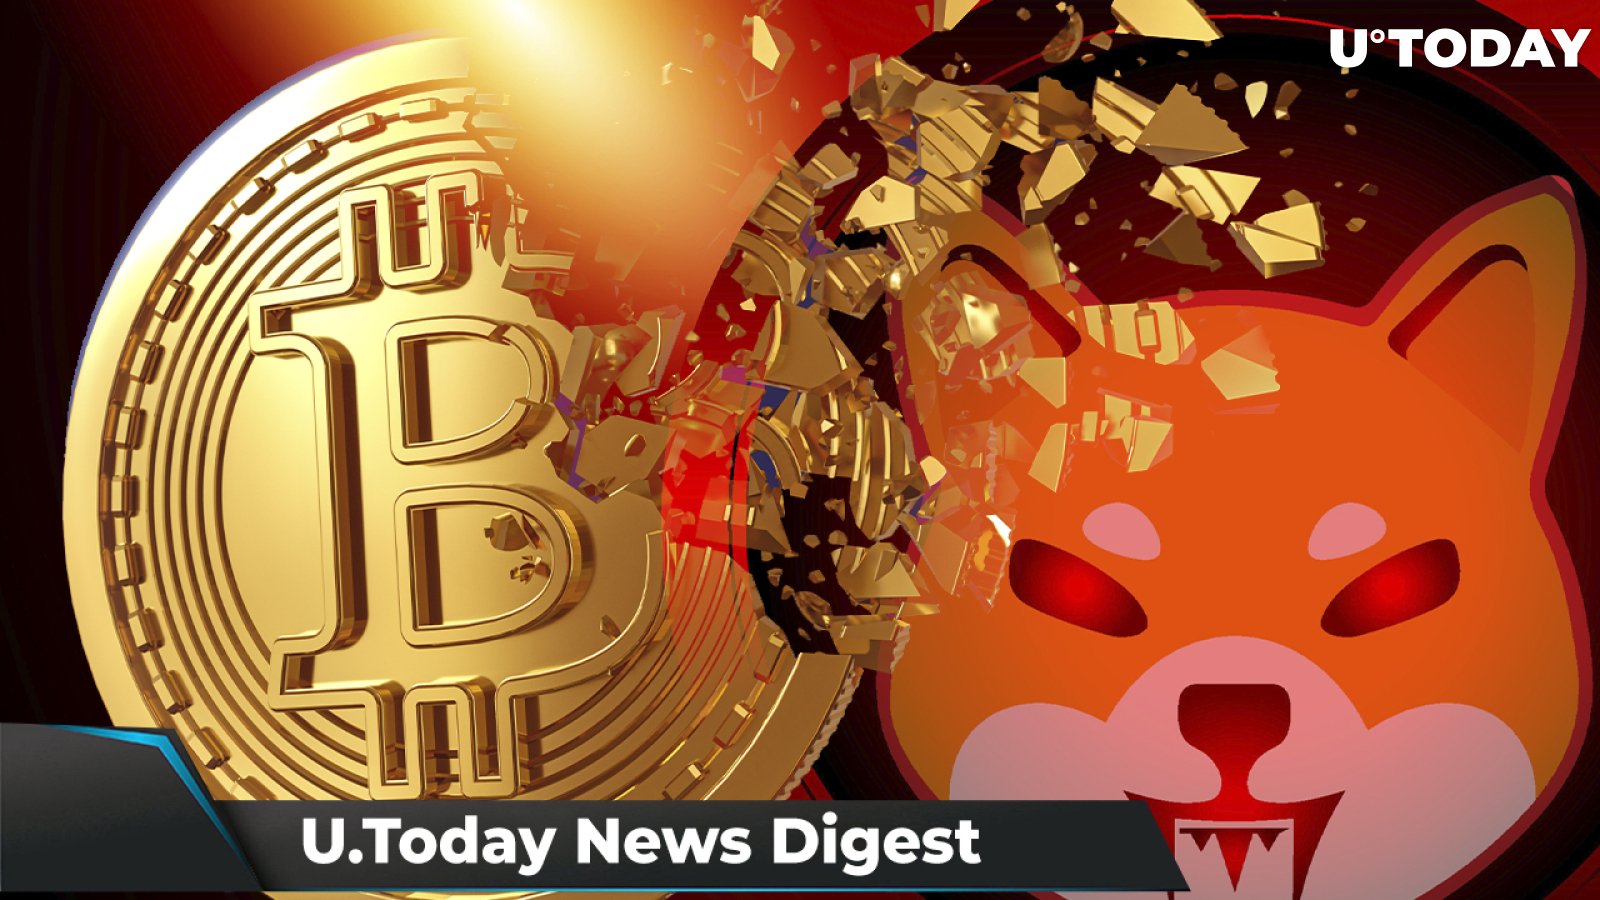 SHIB Army Burns 405 Million SHIB, Bitcoin Collapse Explained, Terra Drops 14%: Crypto News Digest by U.Today